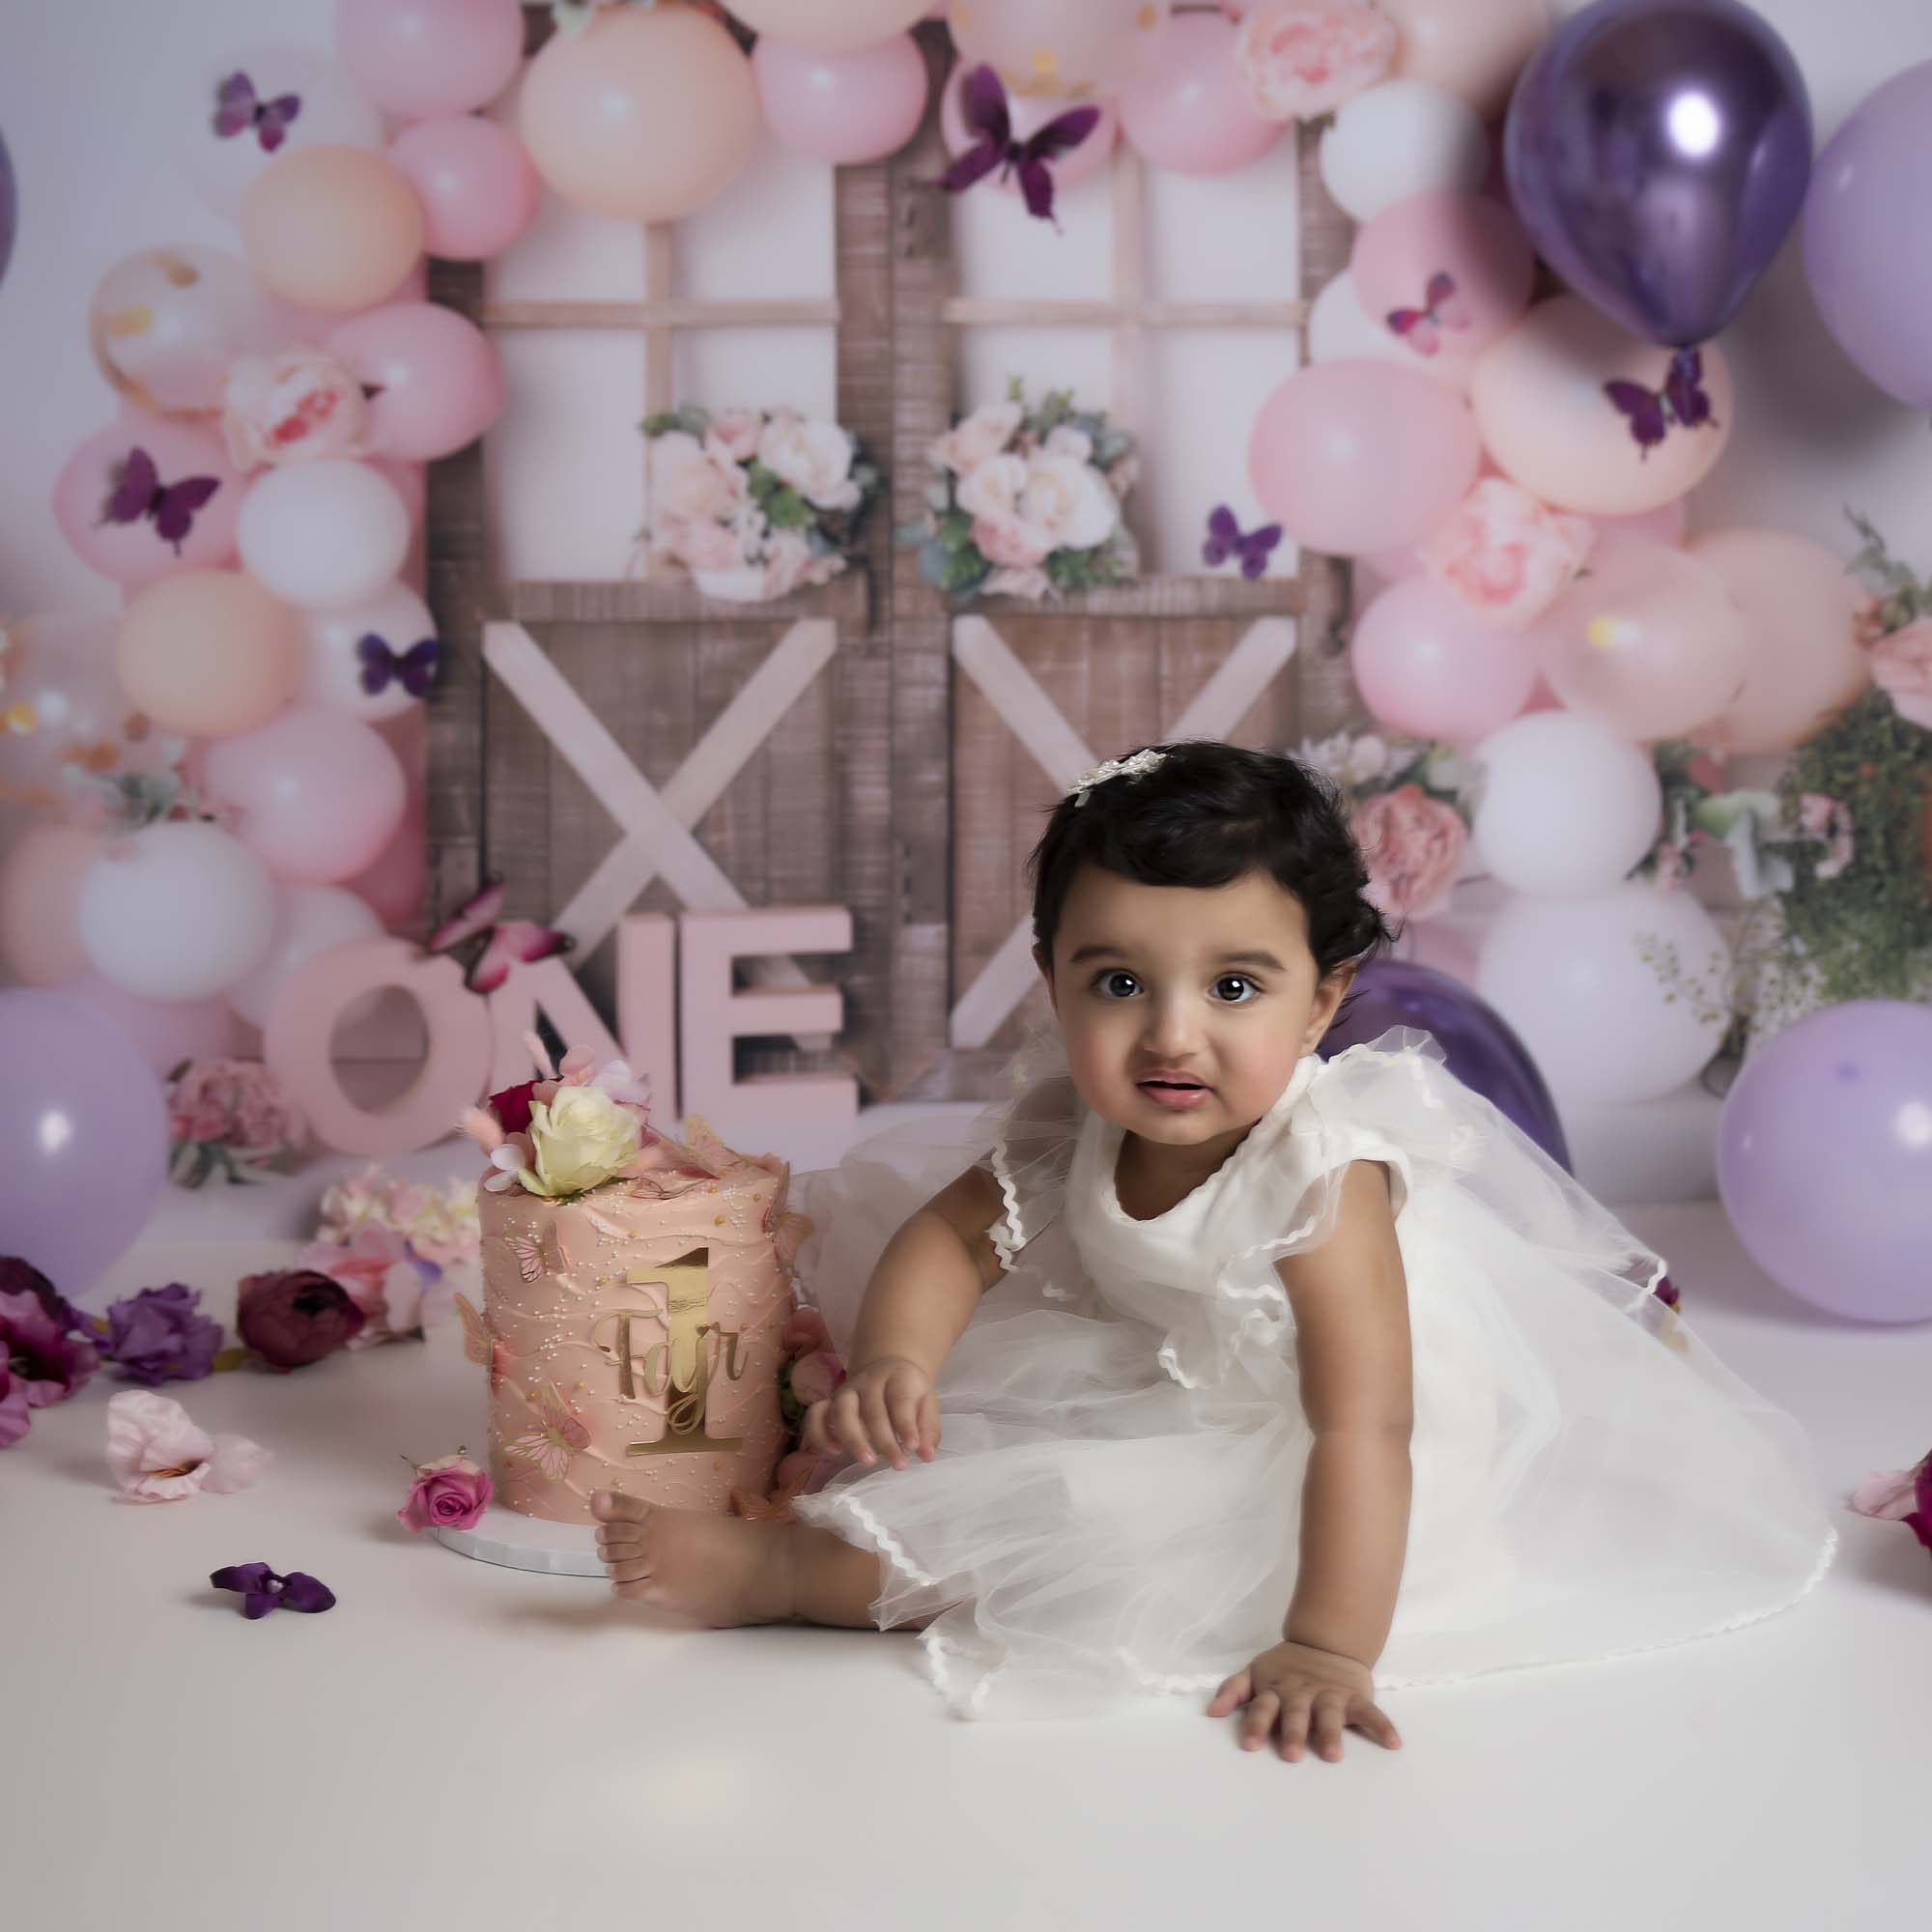 cakesmash photoshoot with one year old little girl and cake photographed by cake smash photography Manchester